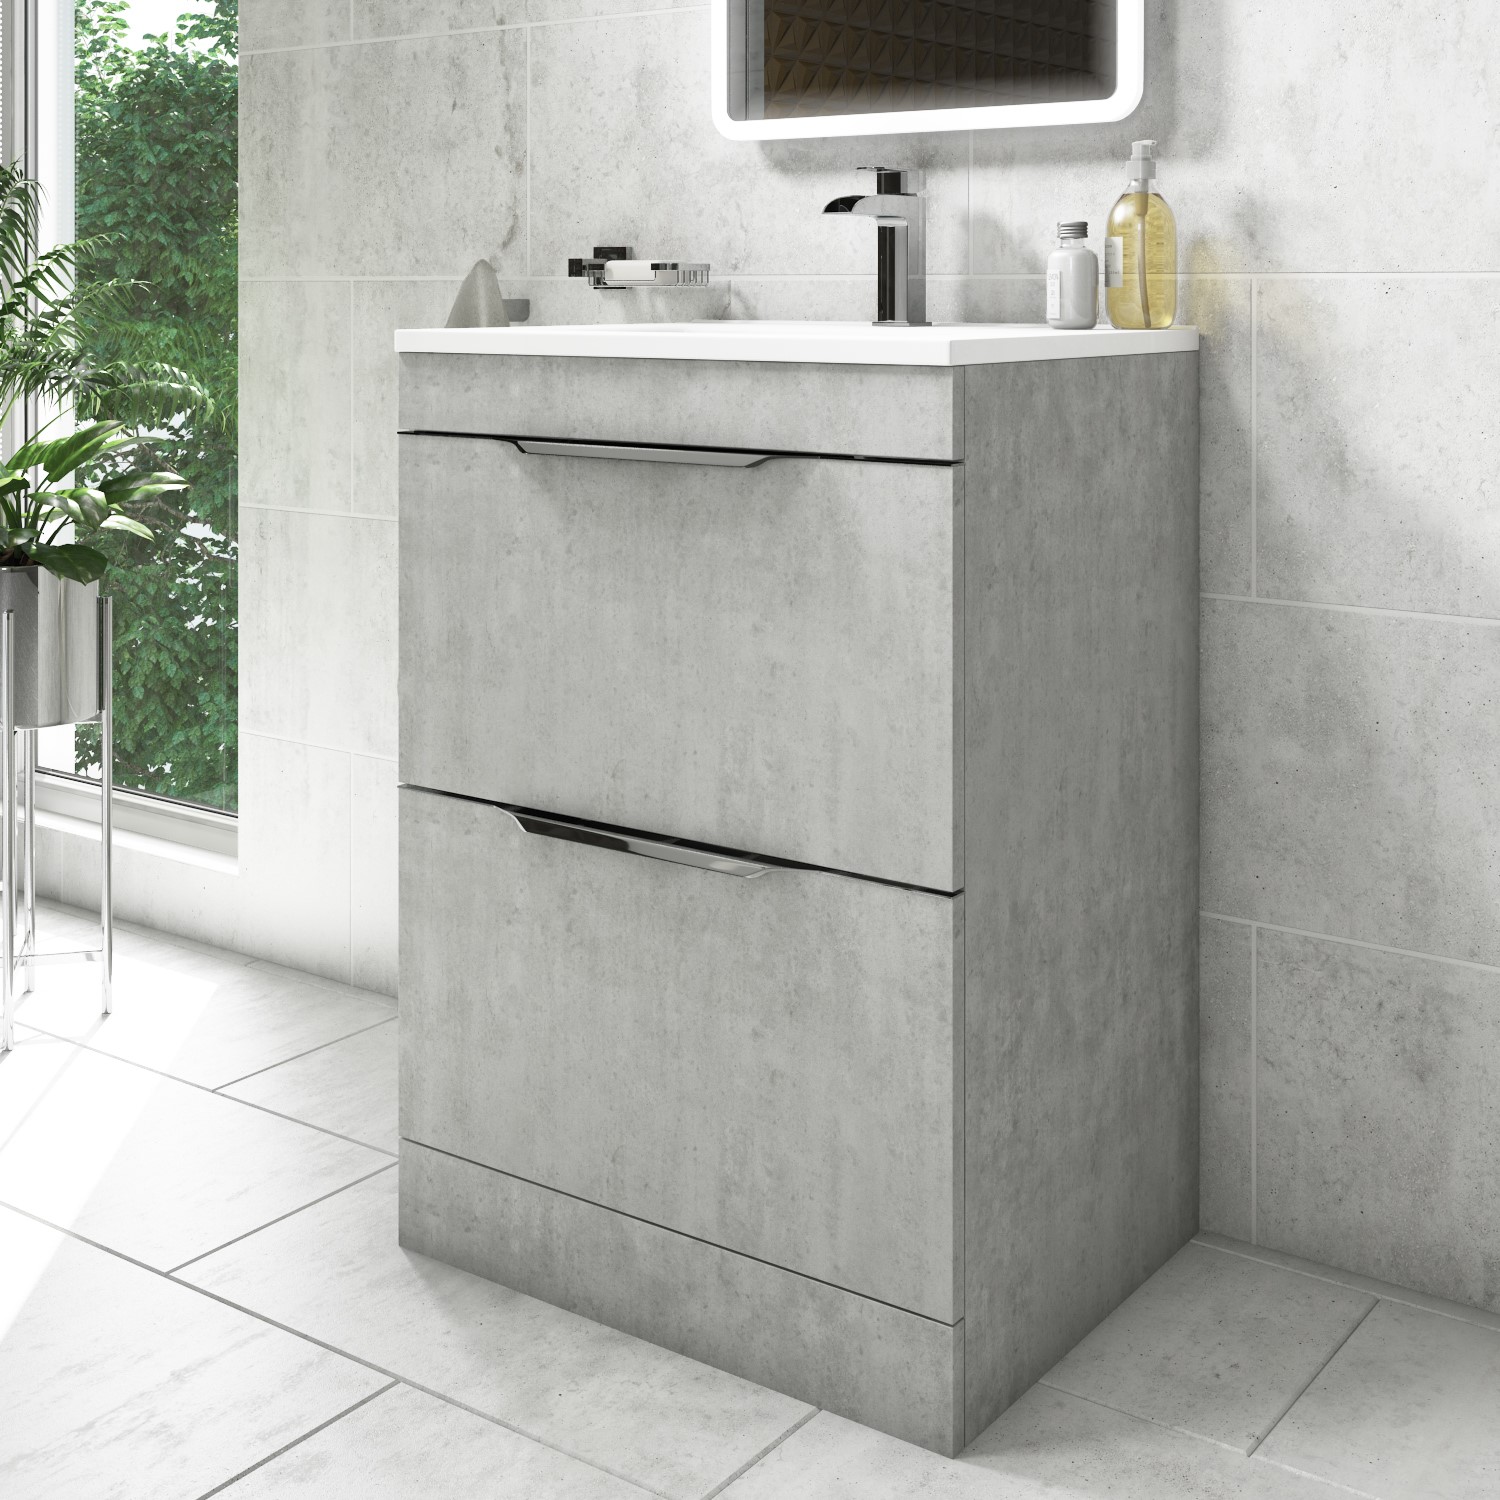 600mm Concrete Effect Freestanding Vanity Unit with Basin - Sion